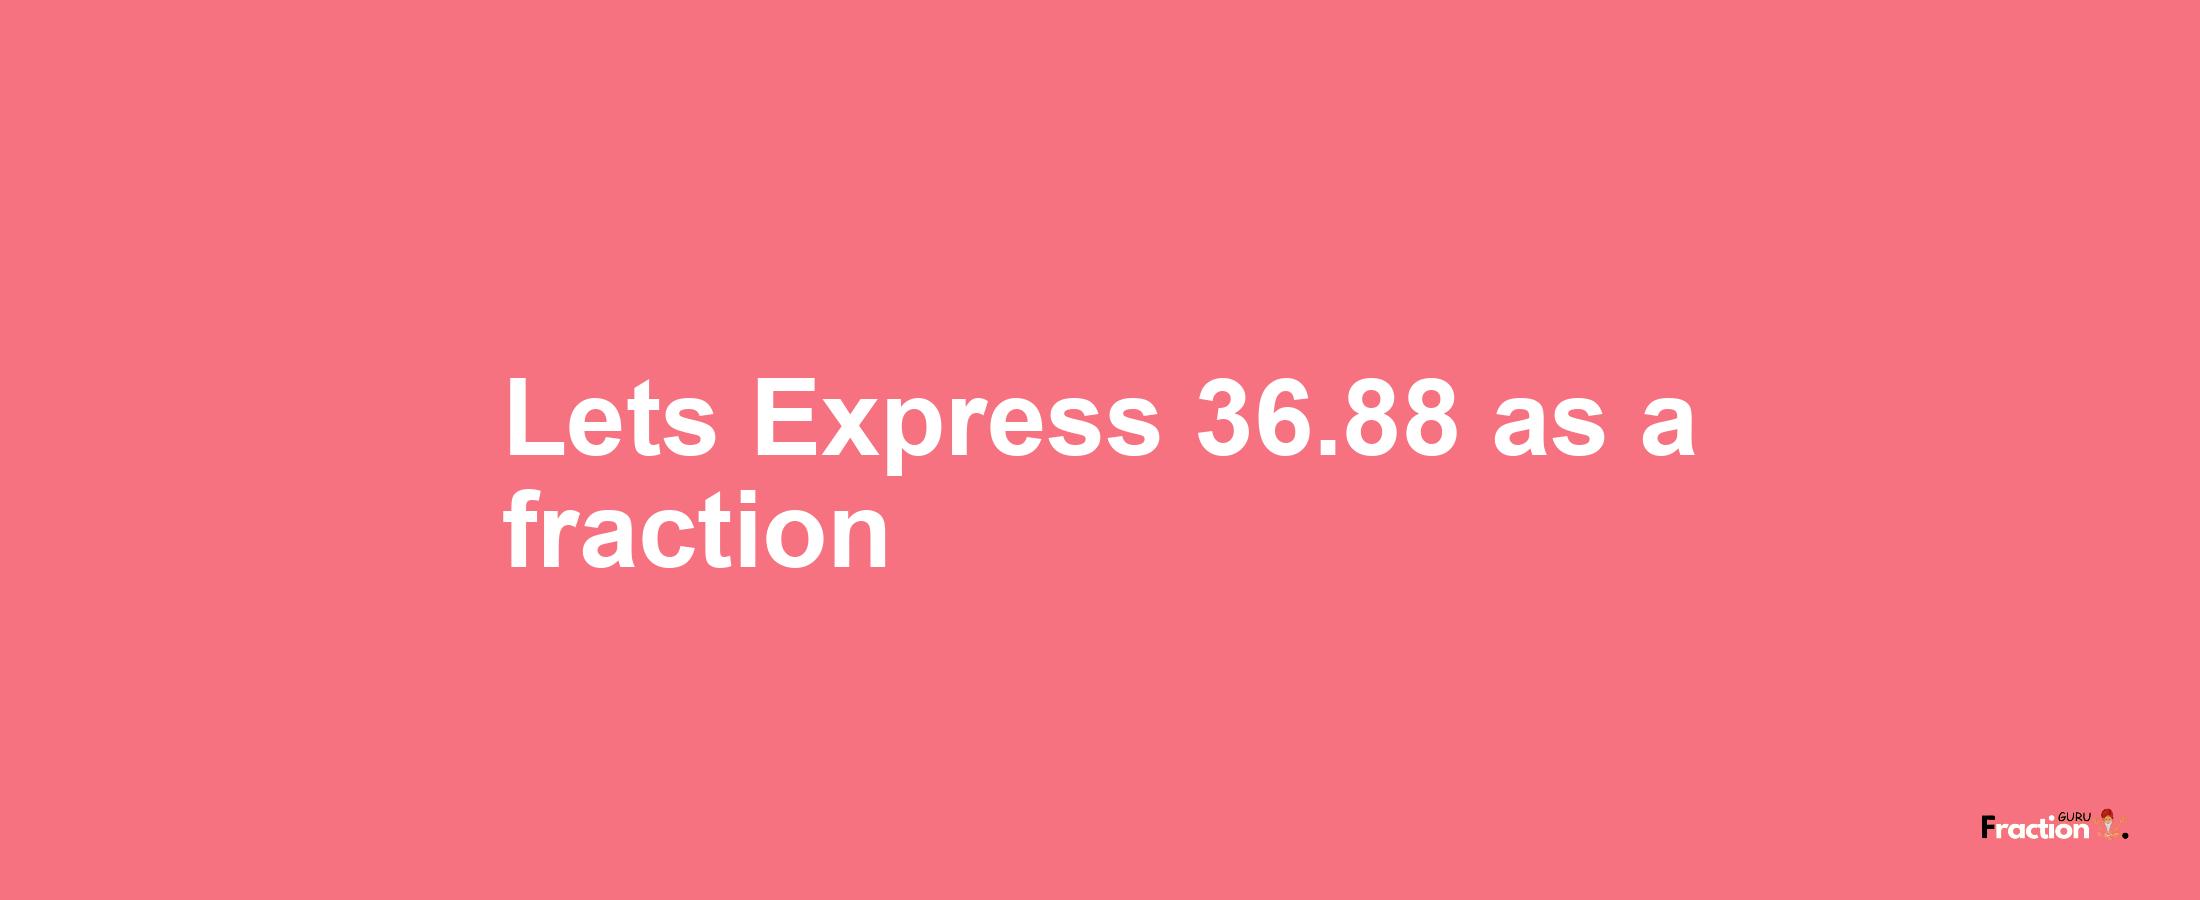 Lets Express 36.88 as afraction